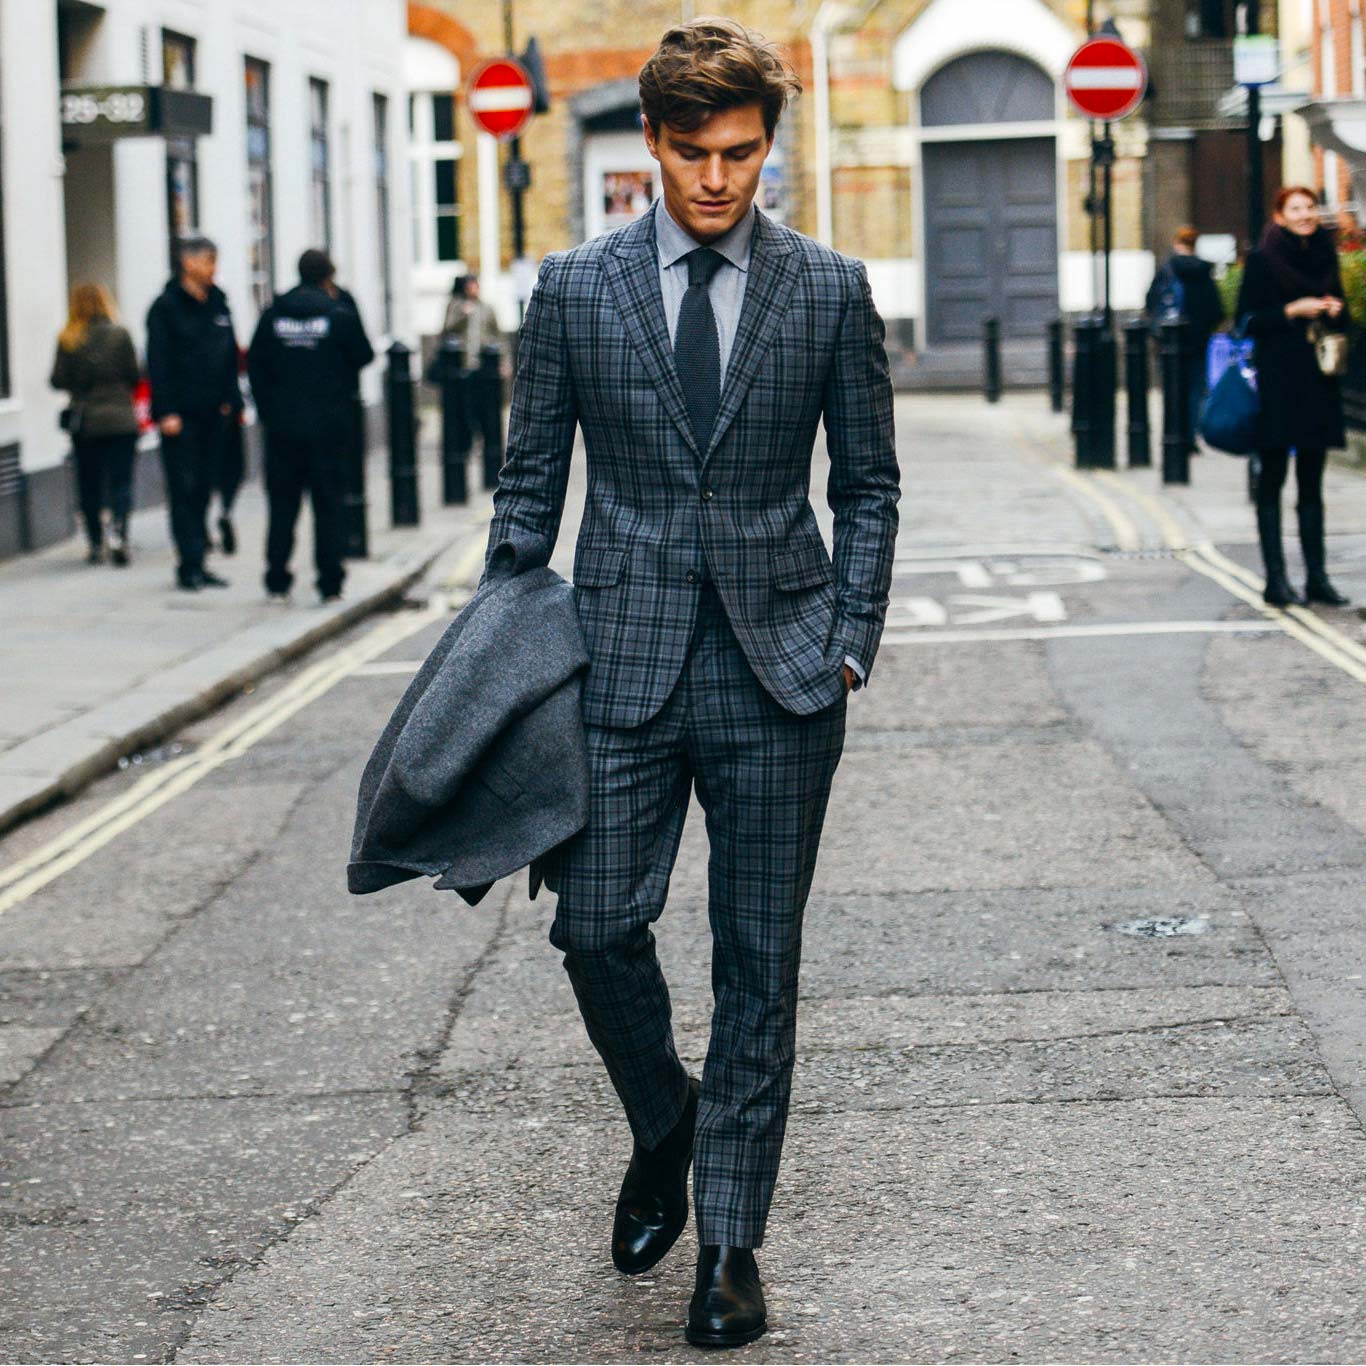 The 10 Things Women Find Most Attractive in Men's Style - The ...